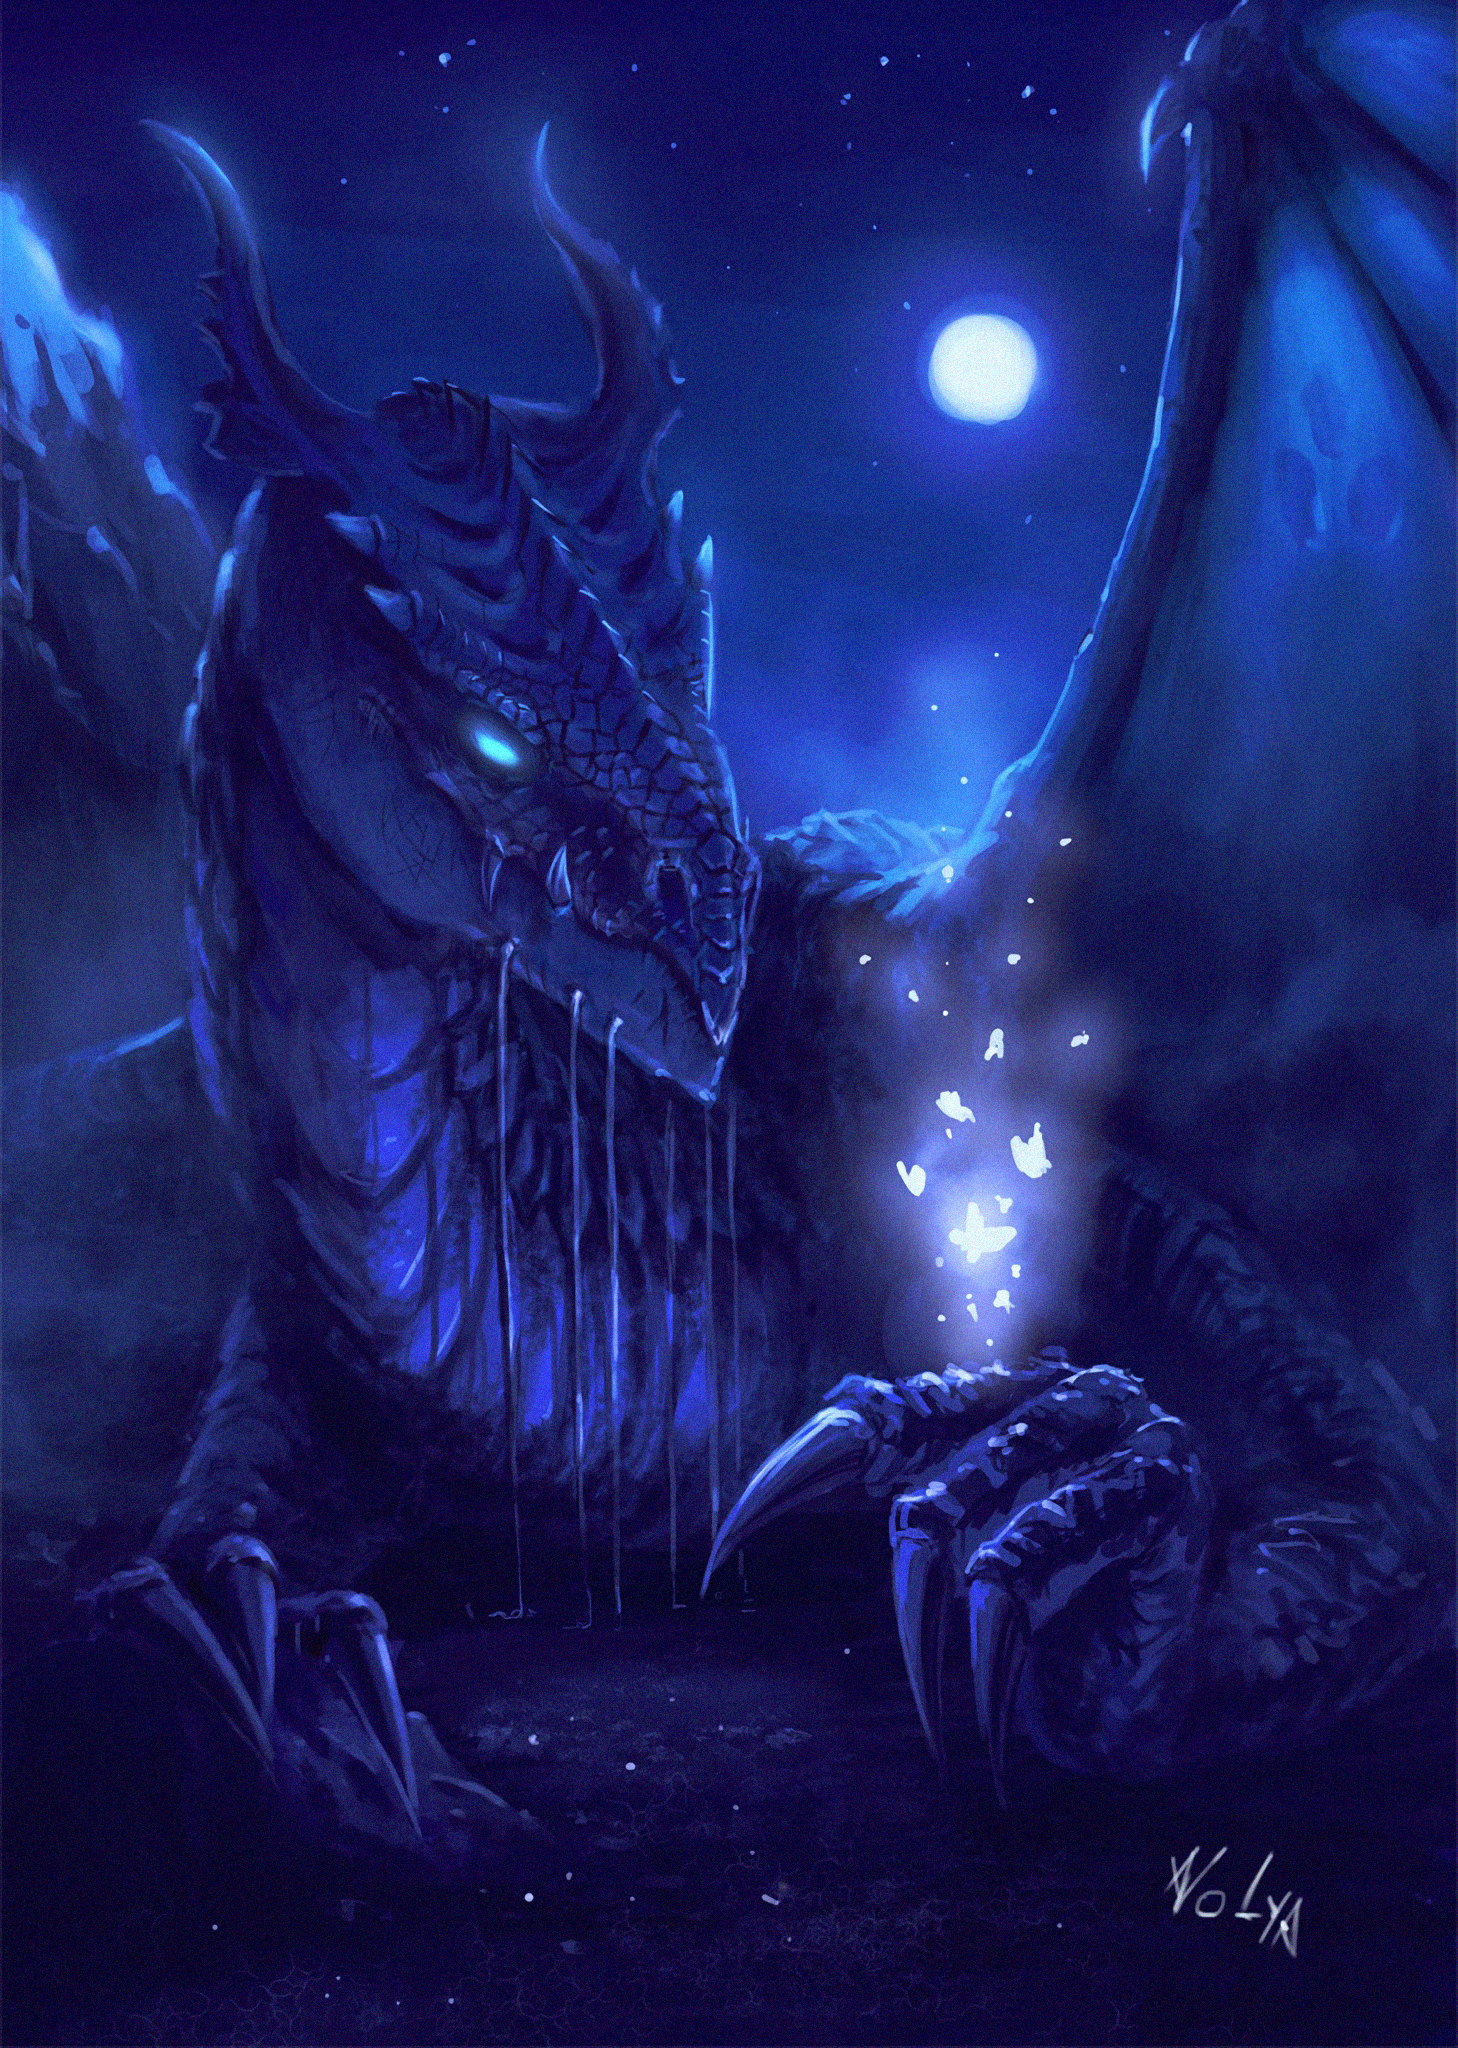 dragon, art, night, being, creature, fantastic wallpaper for mobile